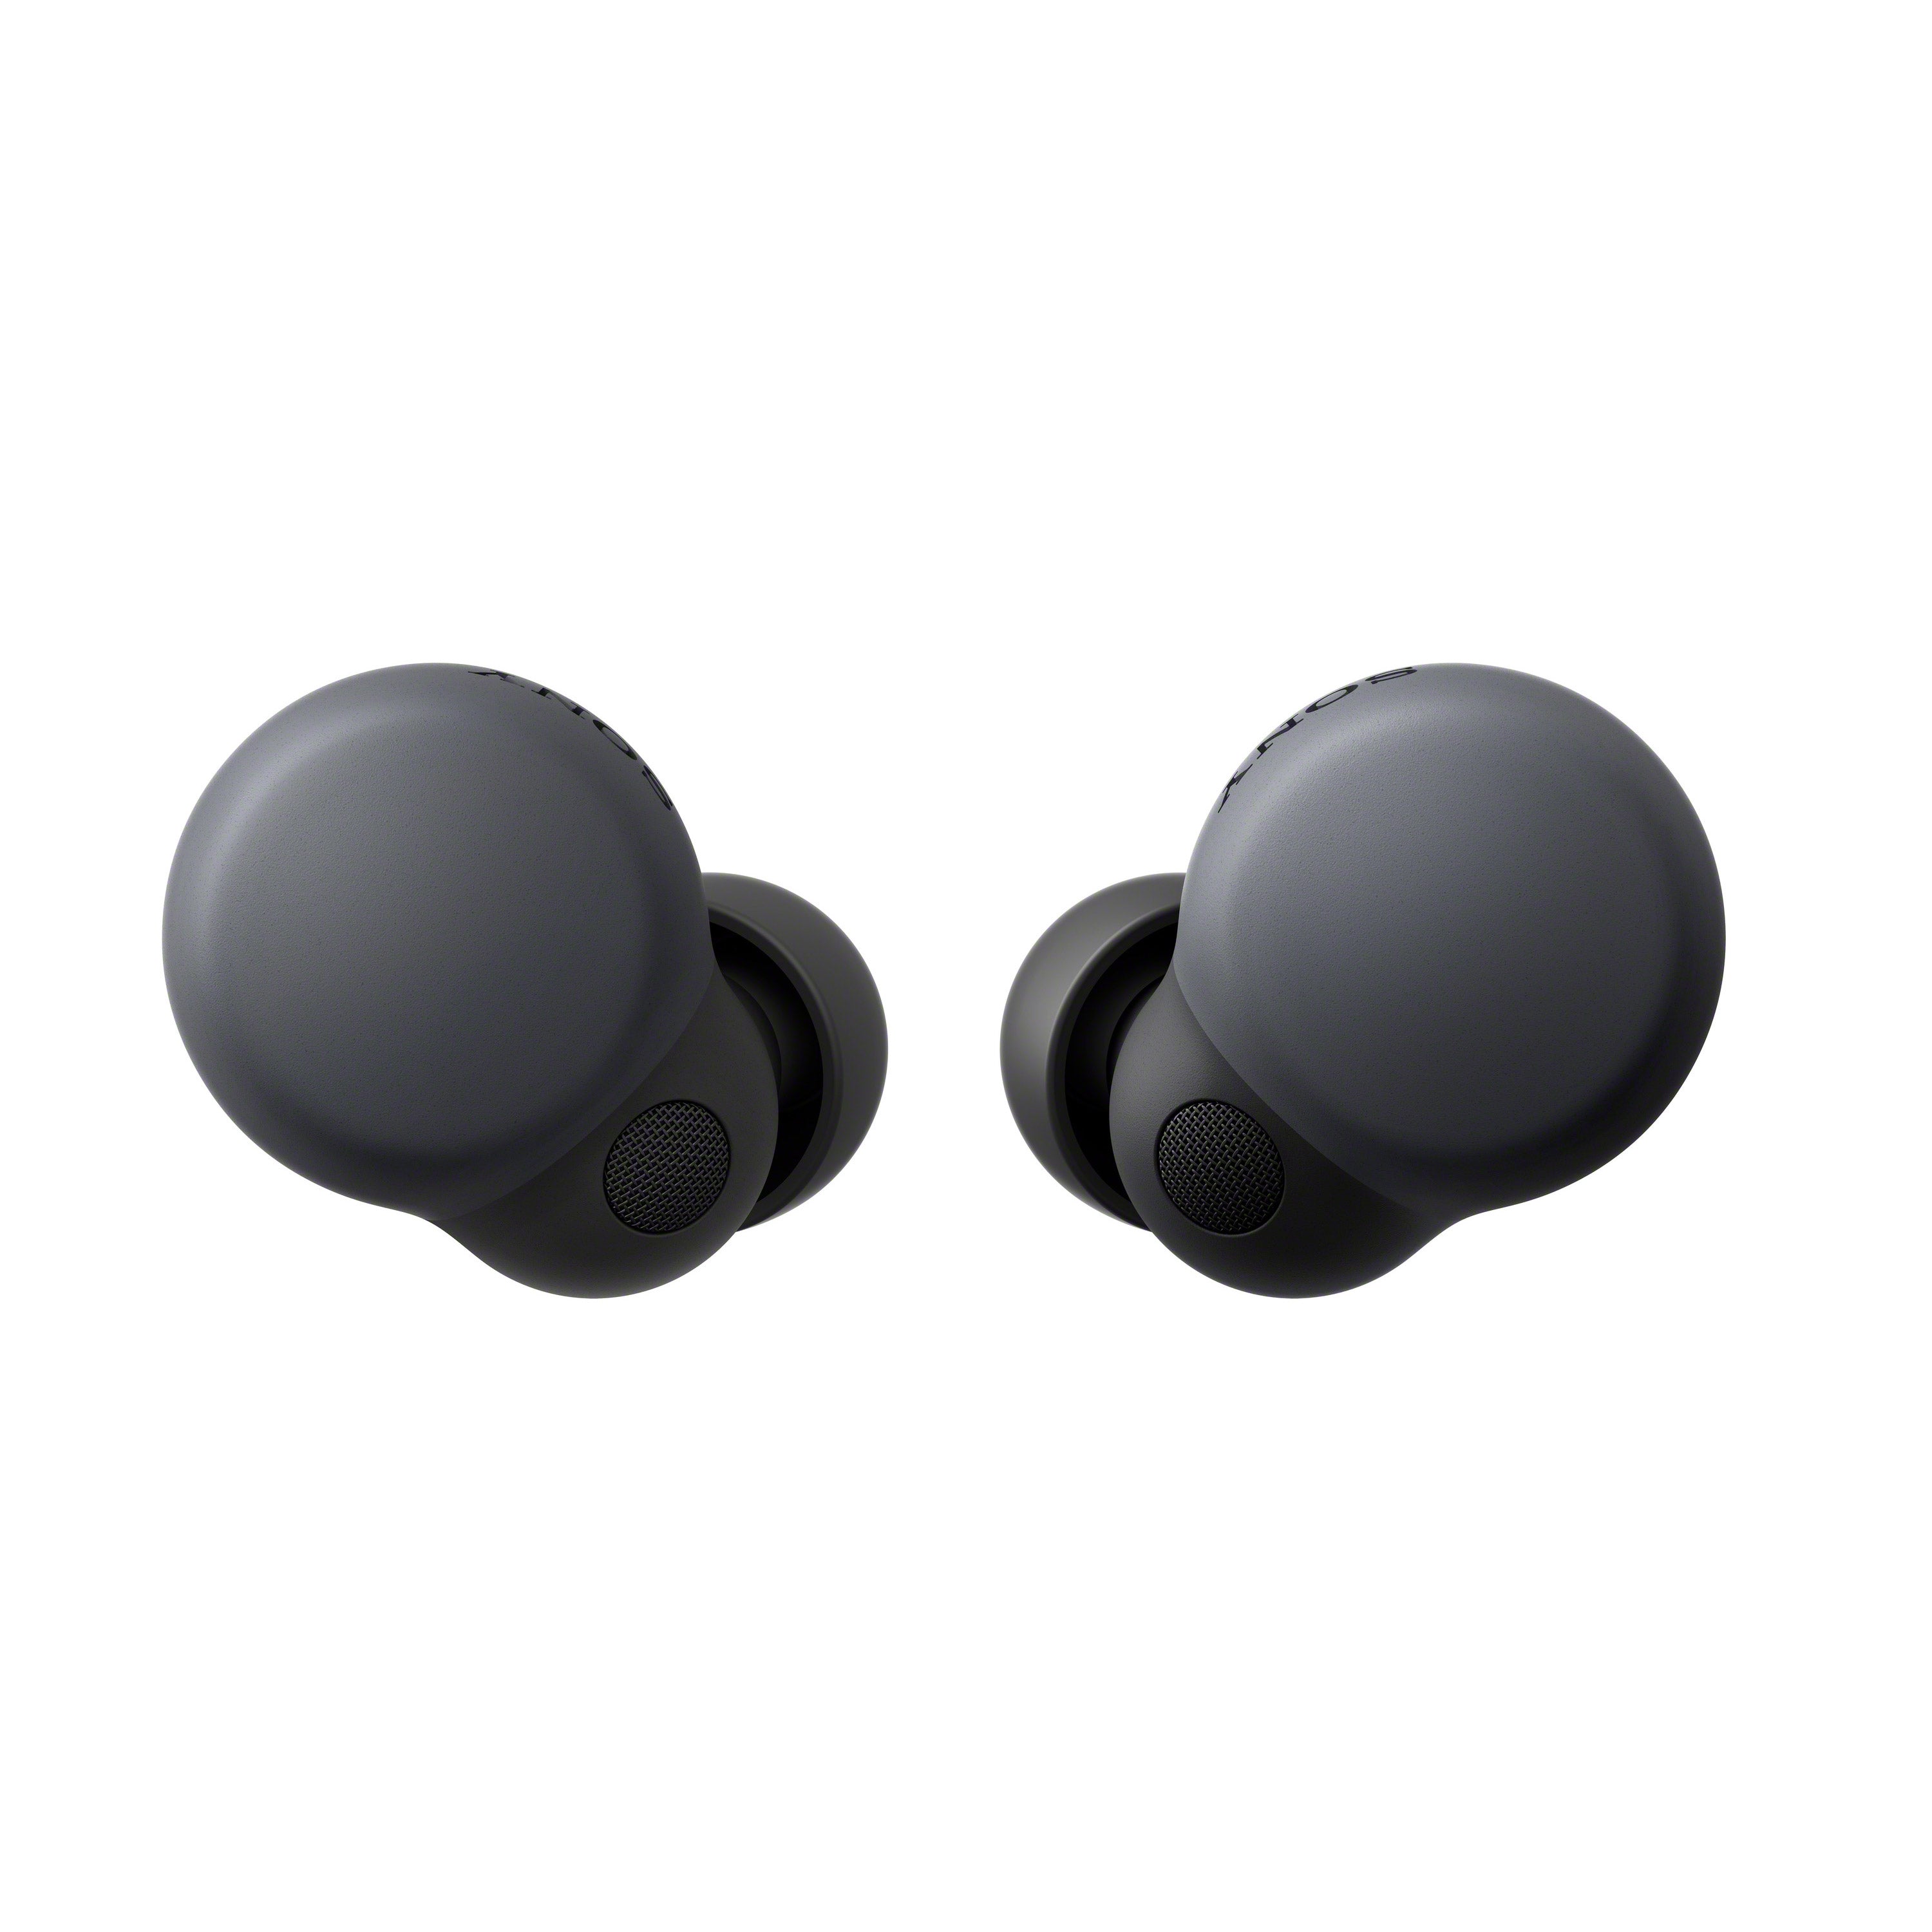 LinkBuds S Truly Wireless Noise Cancelling Earbuds